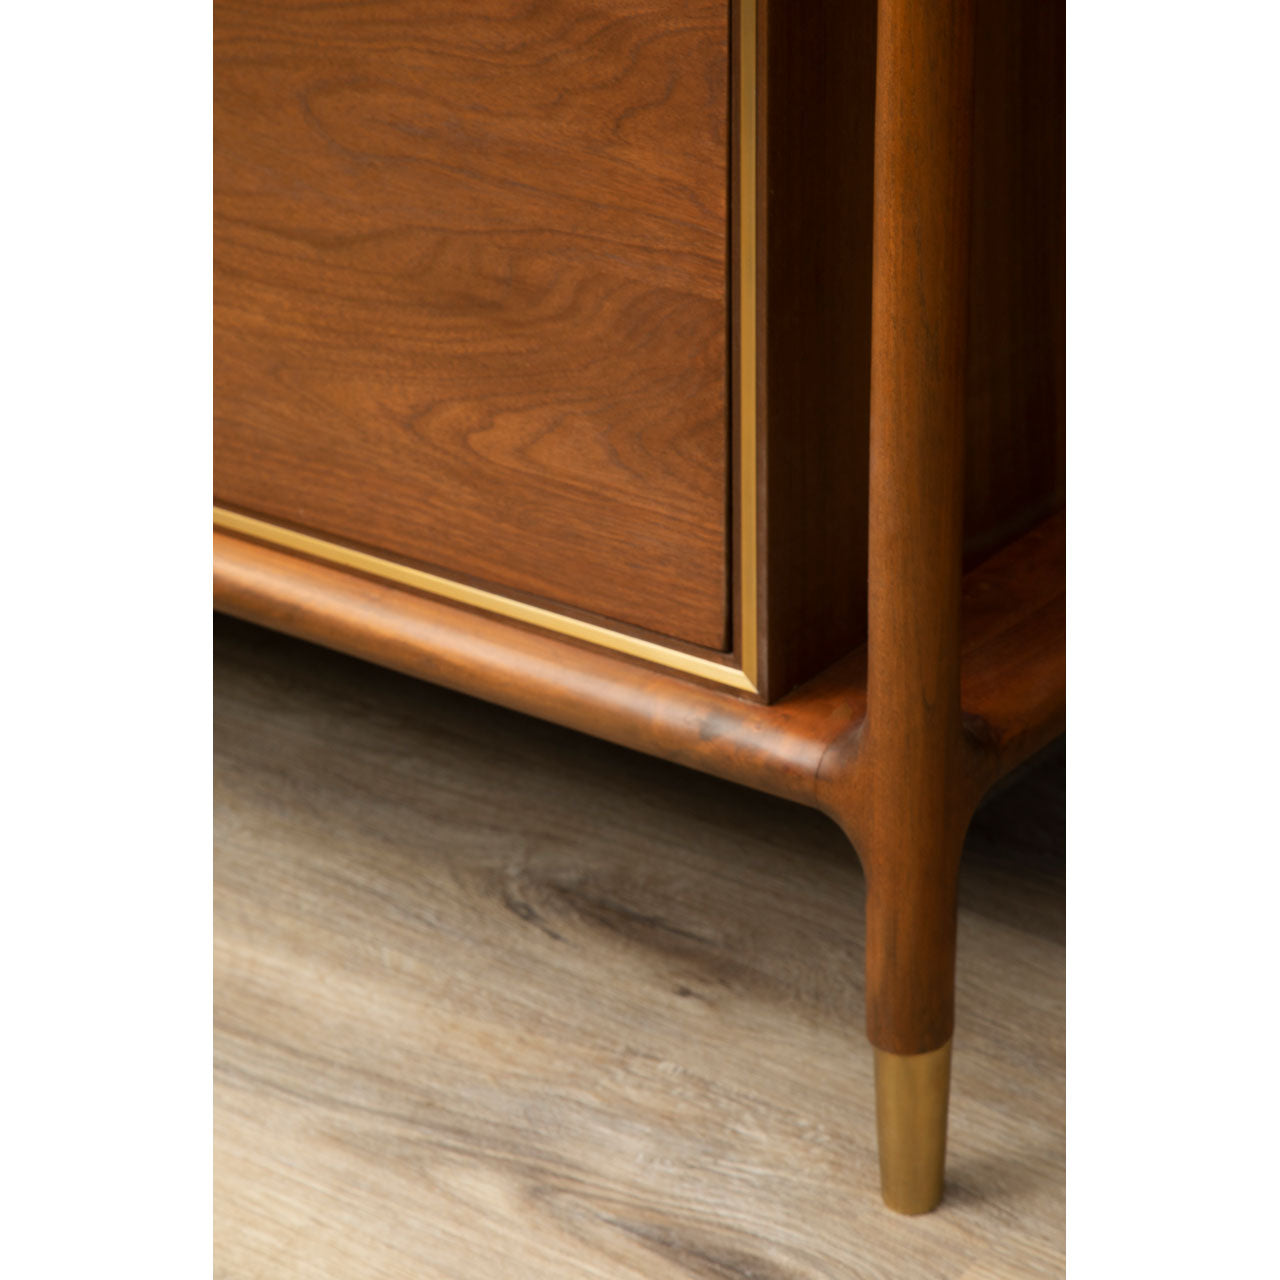  Premier-Olivia's Boutique Hotel Collection - Louise Cabinet-Brown, Gold 845 